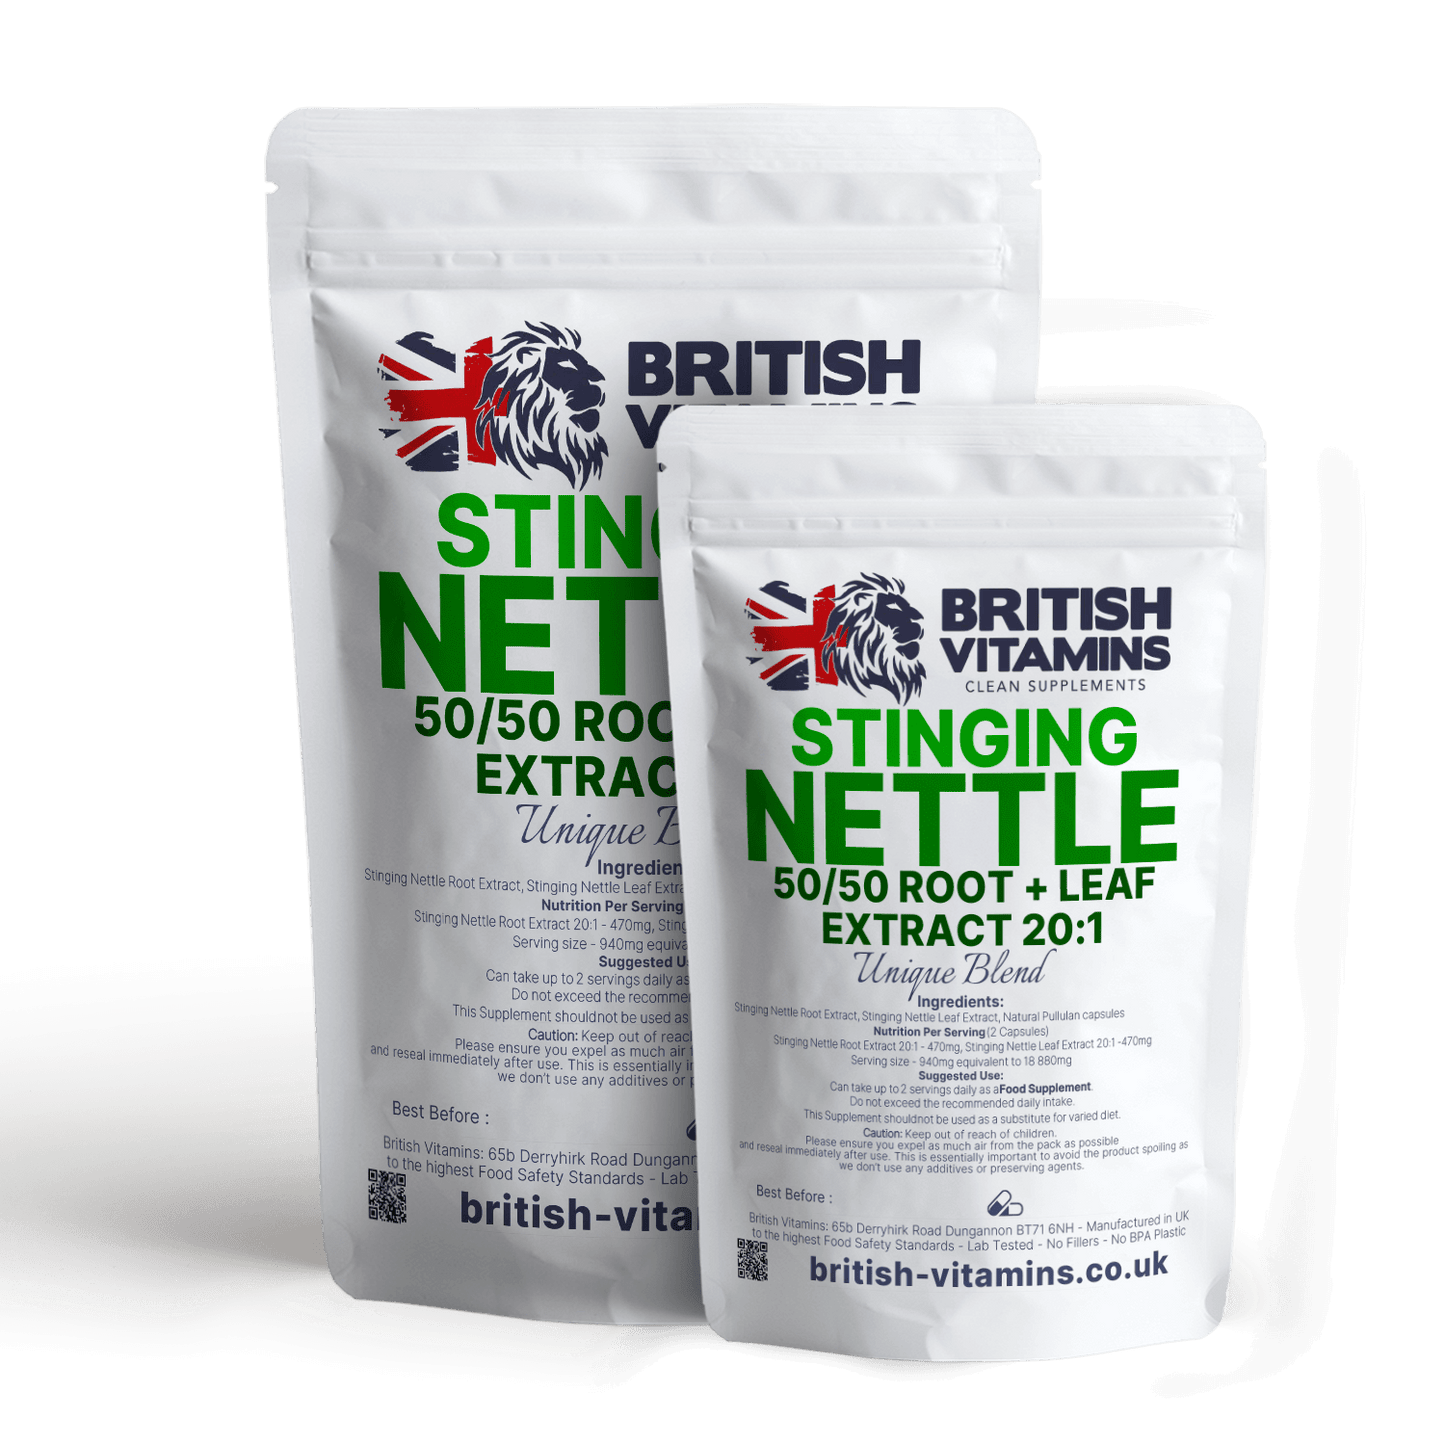 Stinging Nettle Leaf 20:1 Extract 940mg Vegan Natural 50/50 leaf & root capsules Health & Beauty:Vitamins & Lifestyle Supplements:Vitamins & Minerals British Vitamins 5 Capsules ( Sample )  